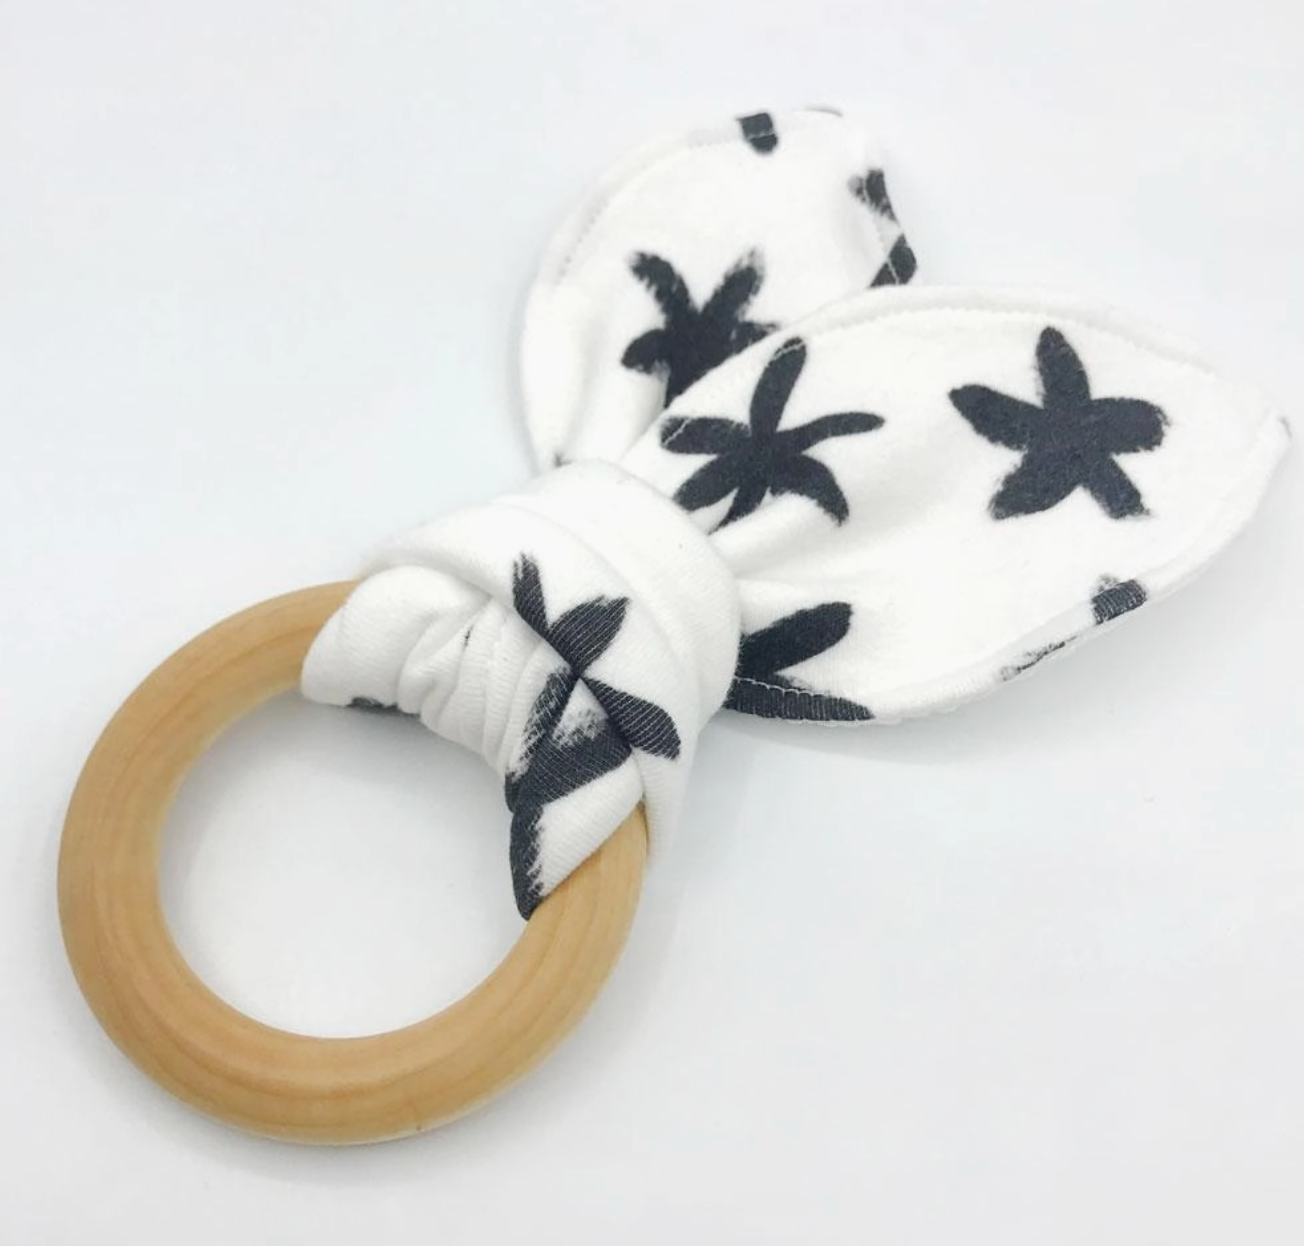 Starry Eyed Organic Cotton/Maple Teether